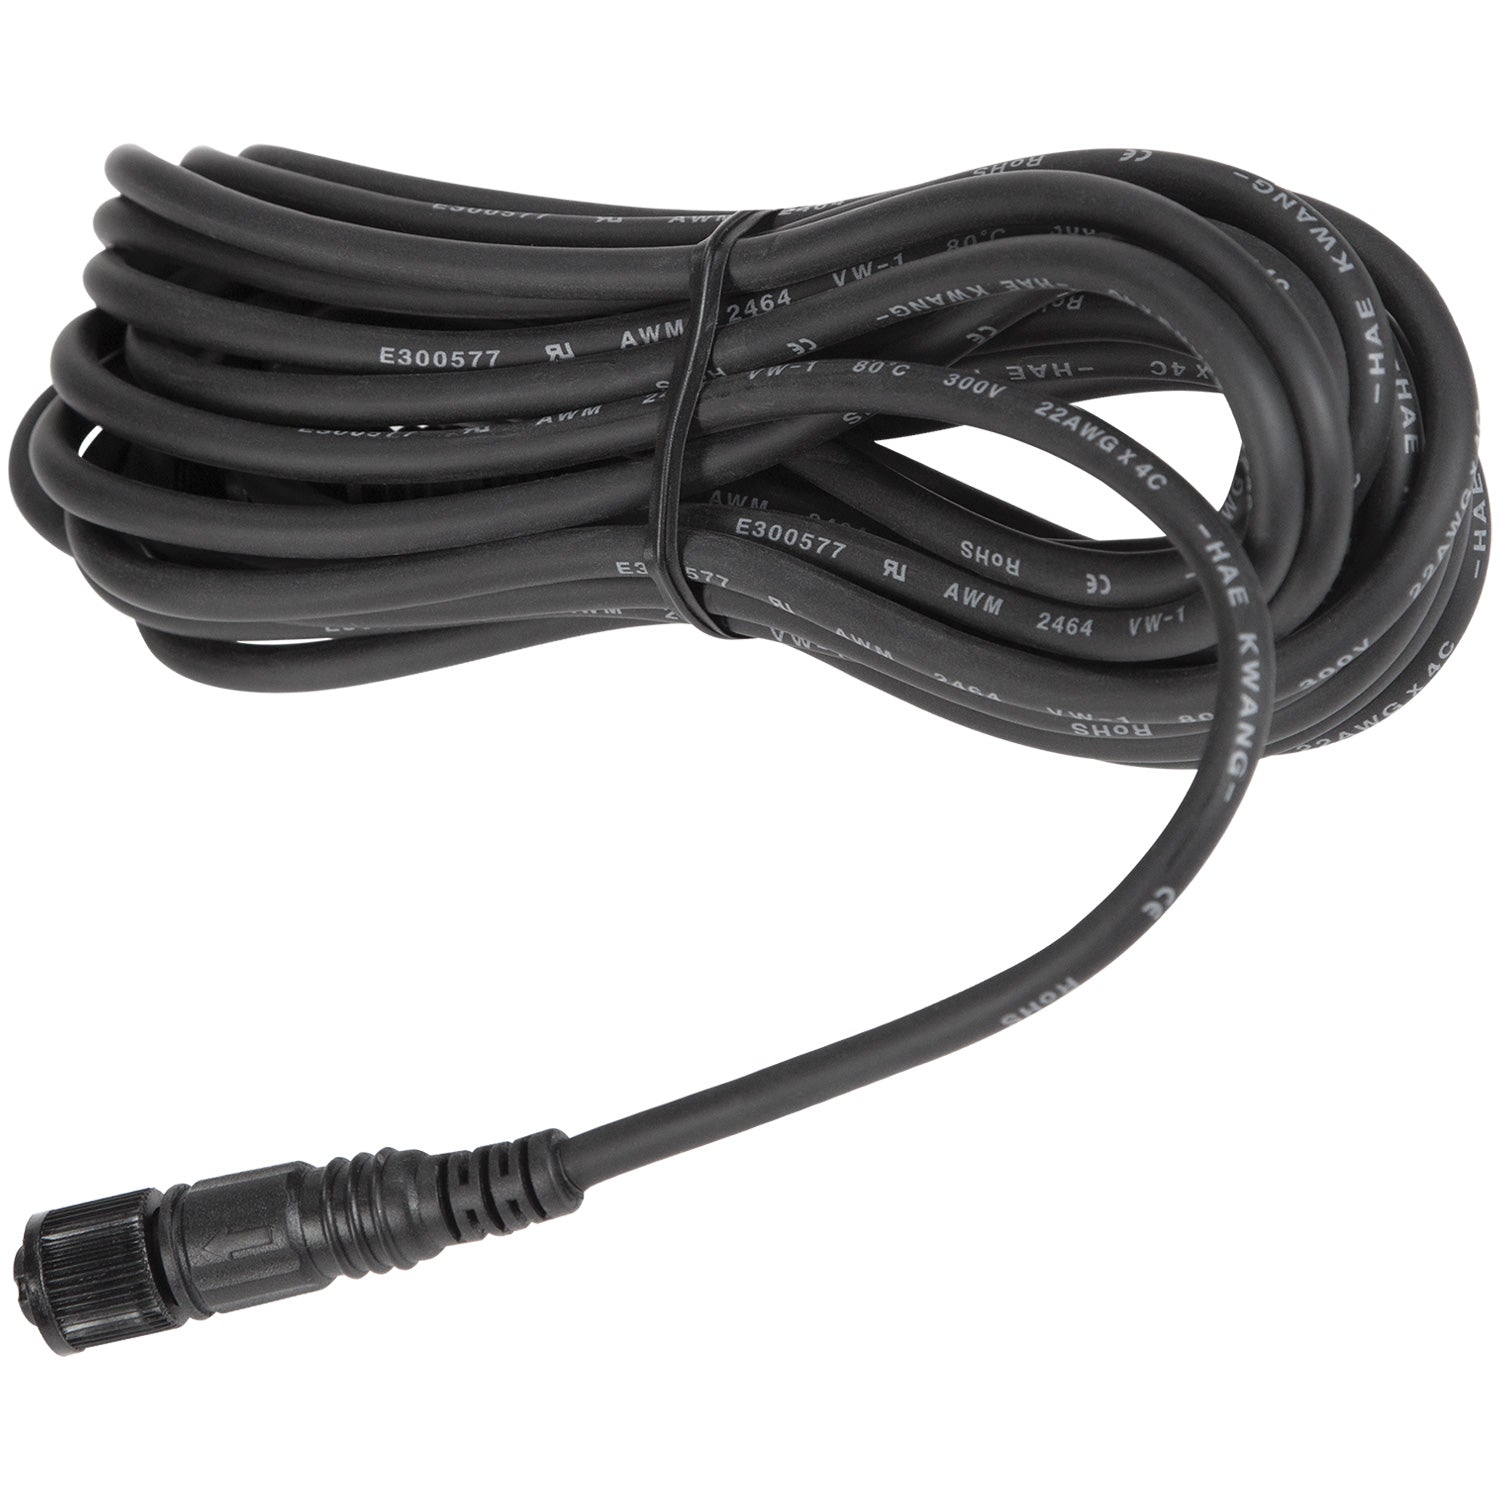 Flex Dimmer Extension Cable